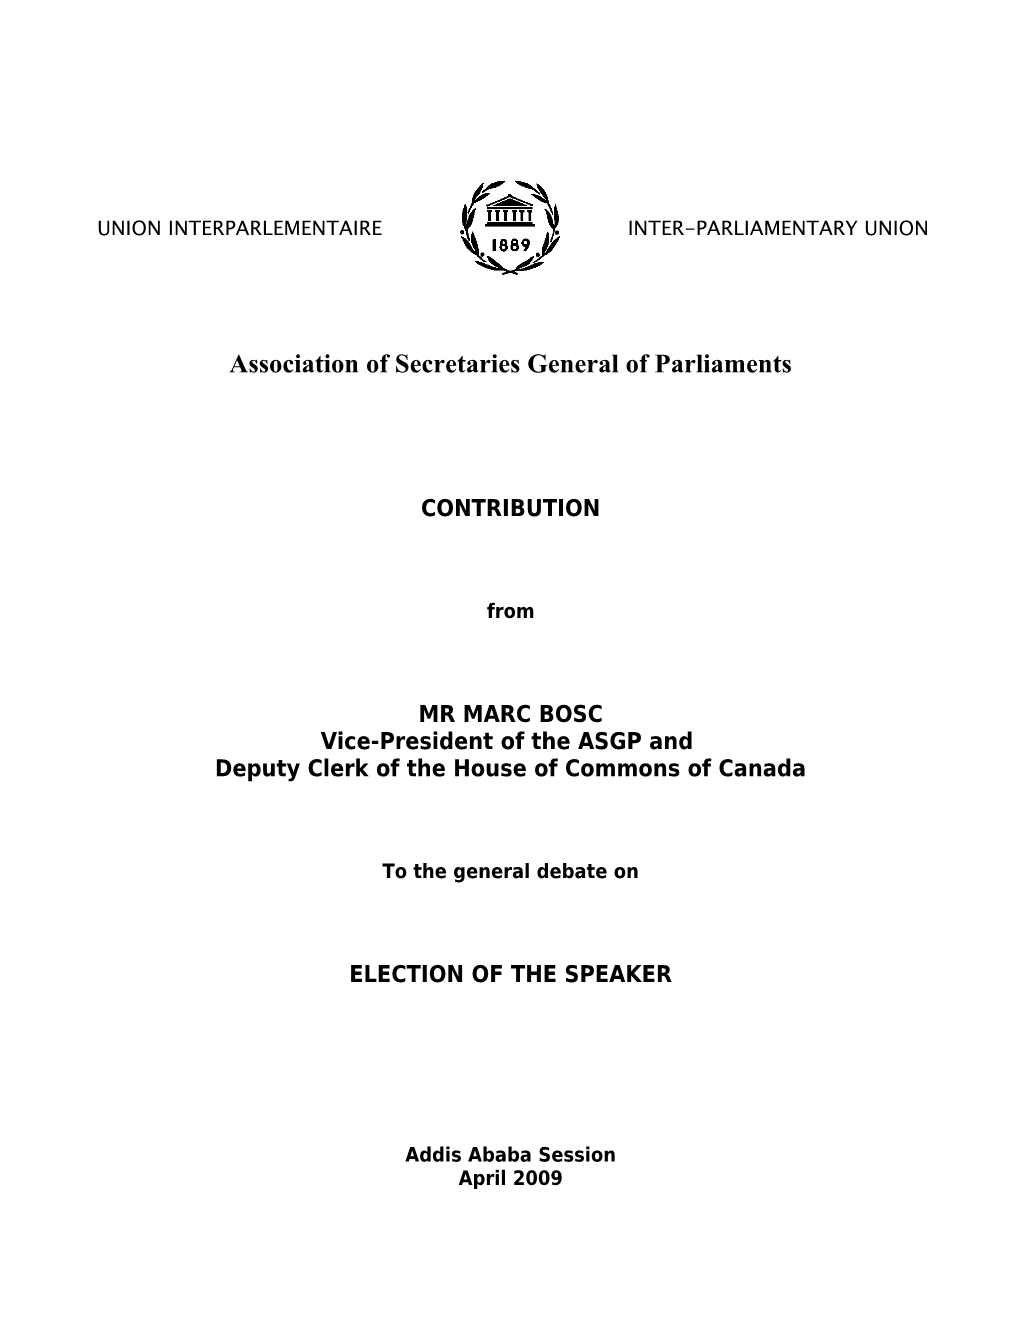 Election of the Speaker